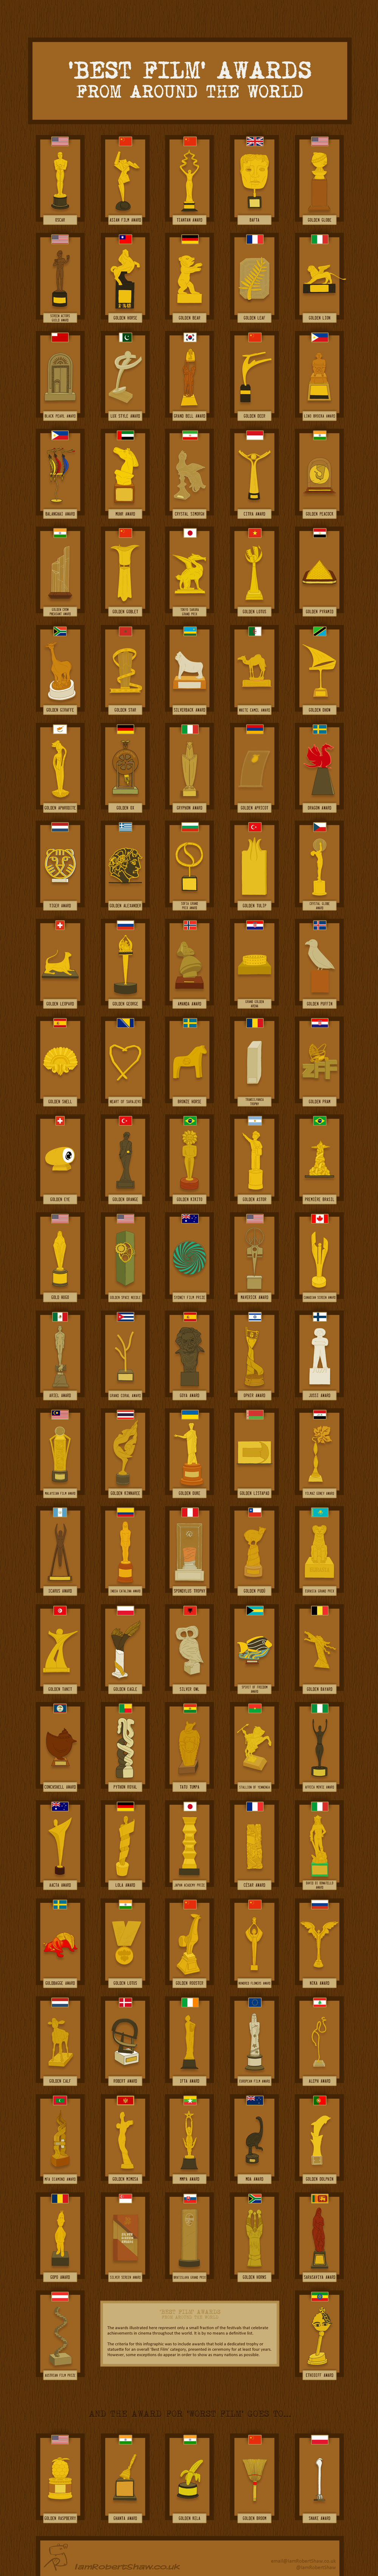 A series of hand drawn illustrations that introduce various film awards.